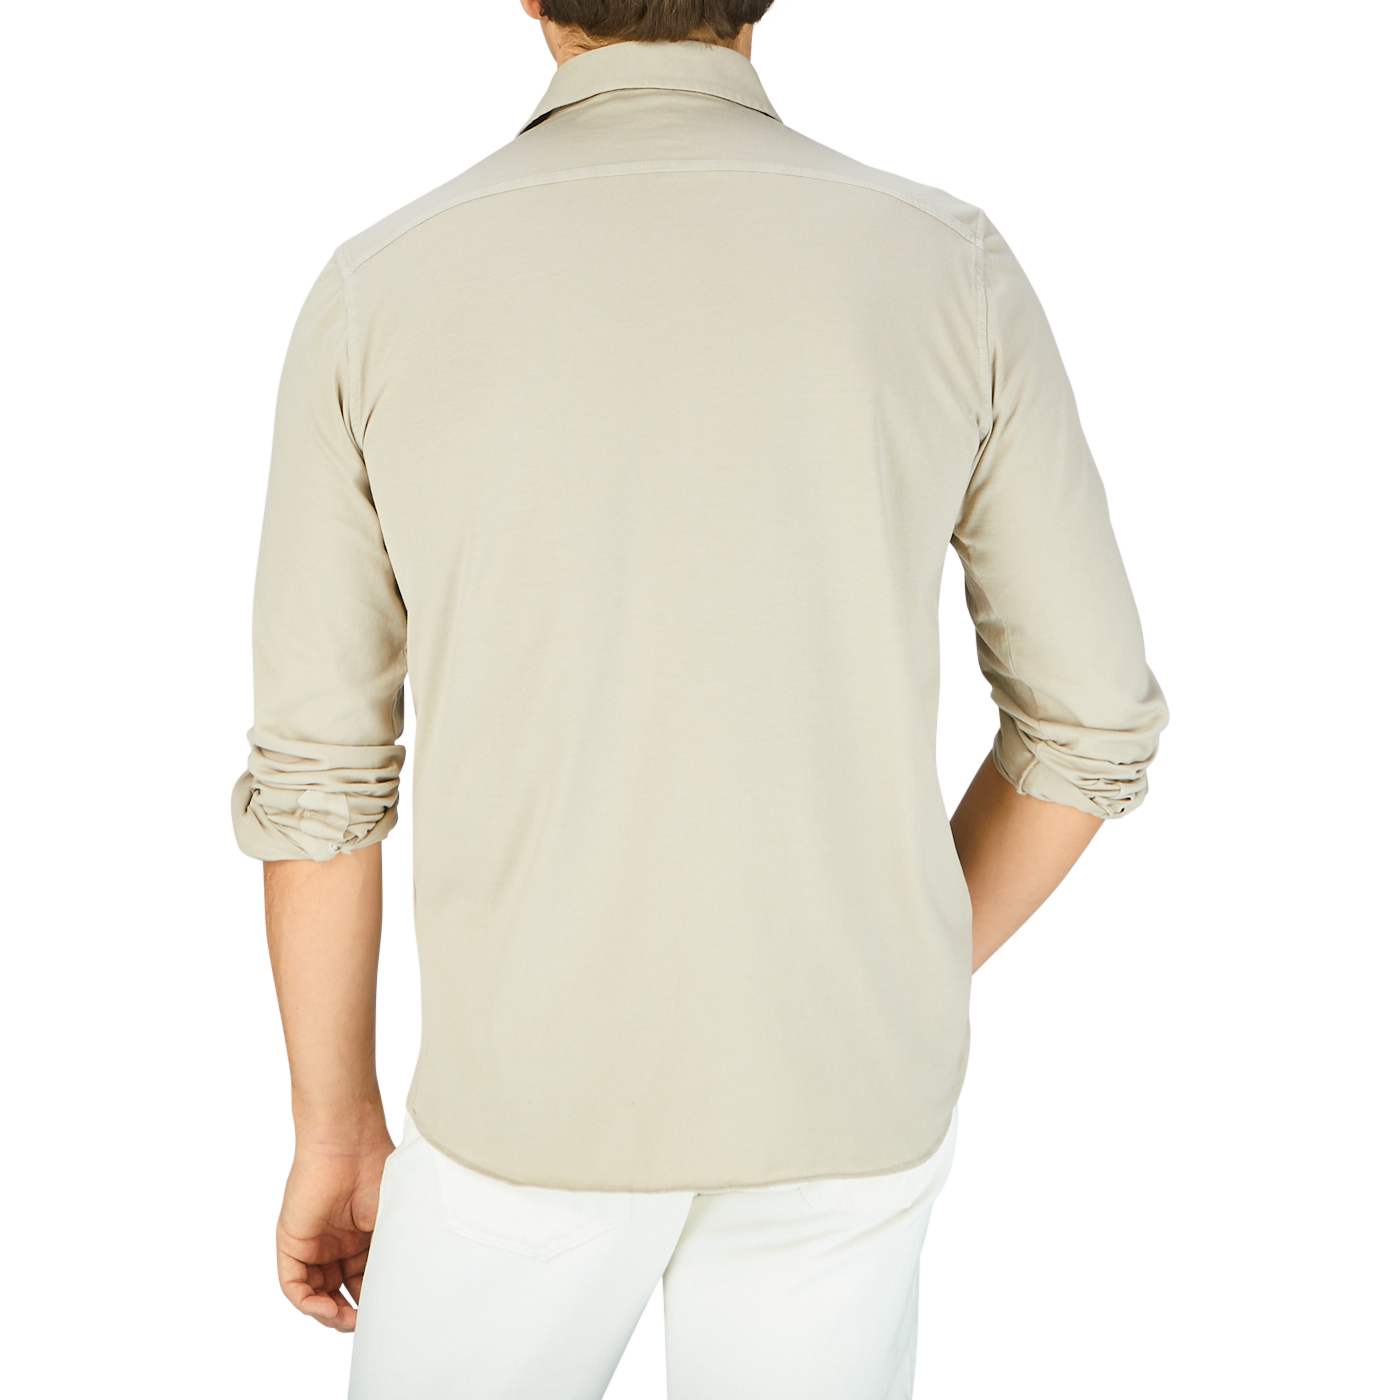 The back view of a man wearing a Filippo de Laurentiis Ciottollo Beige Cotton Jersey Knitted Shirt and white pants.